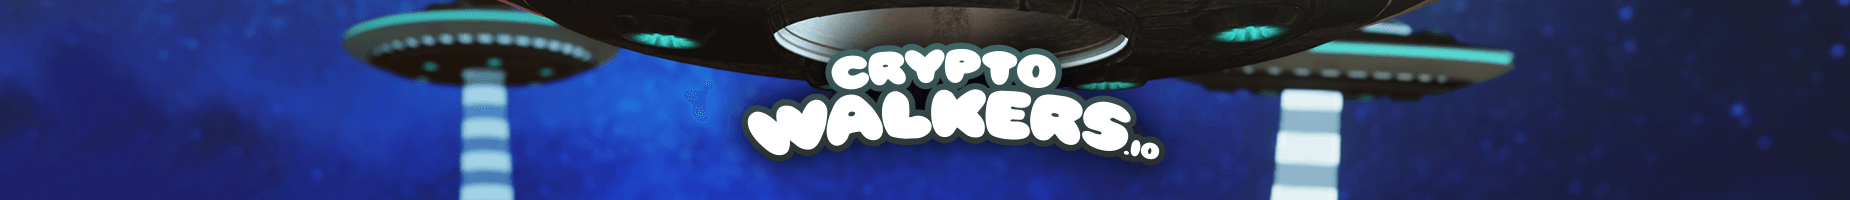 Cryptowalkers_Official 横幅